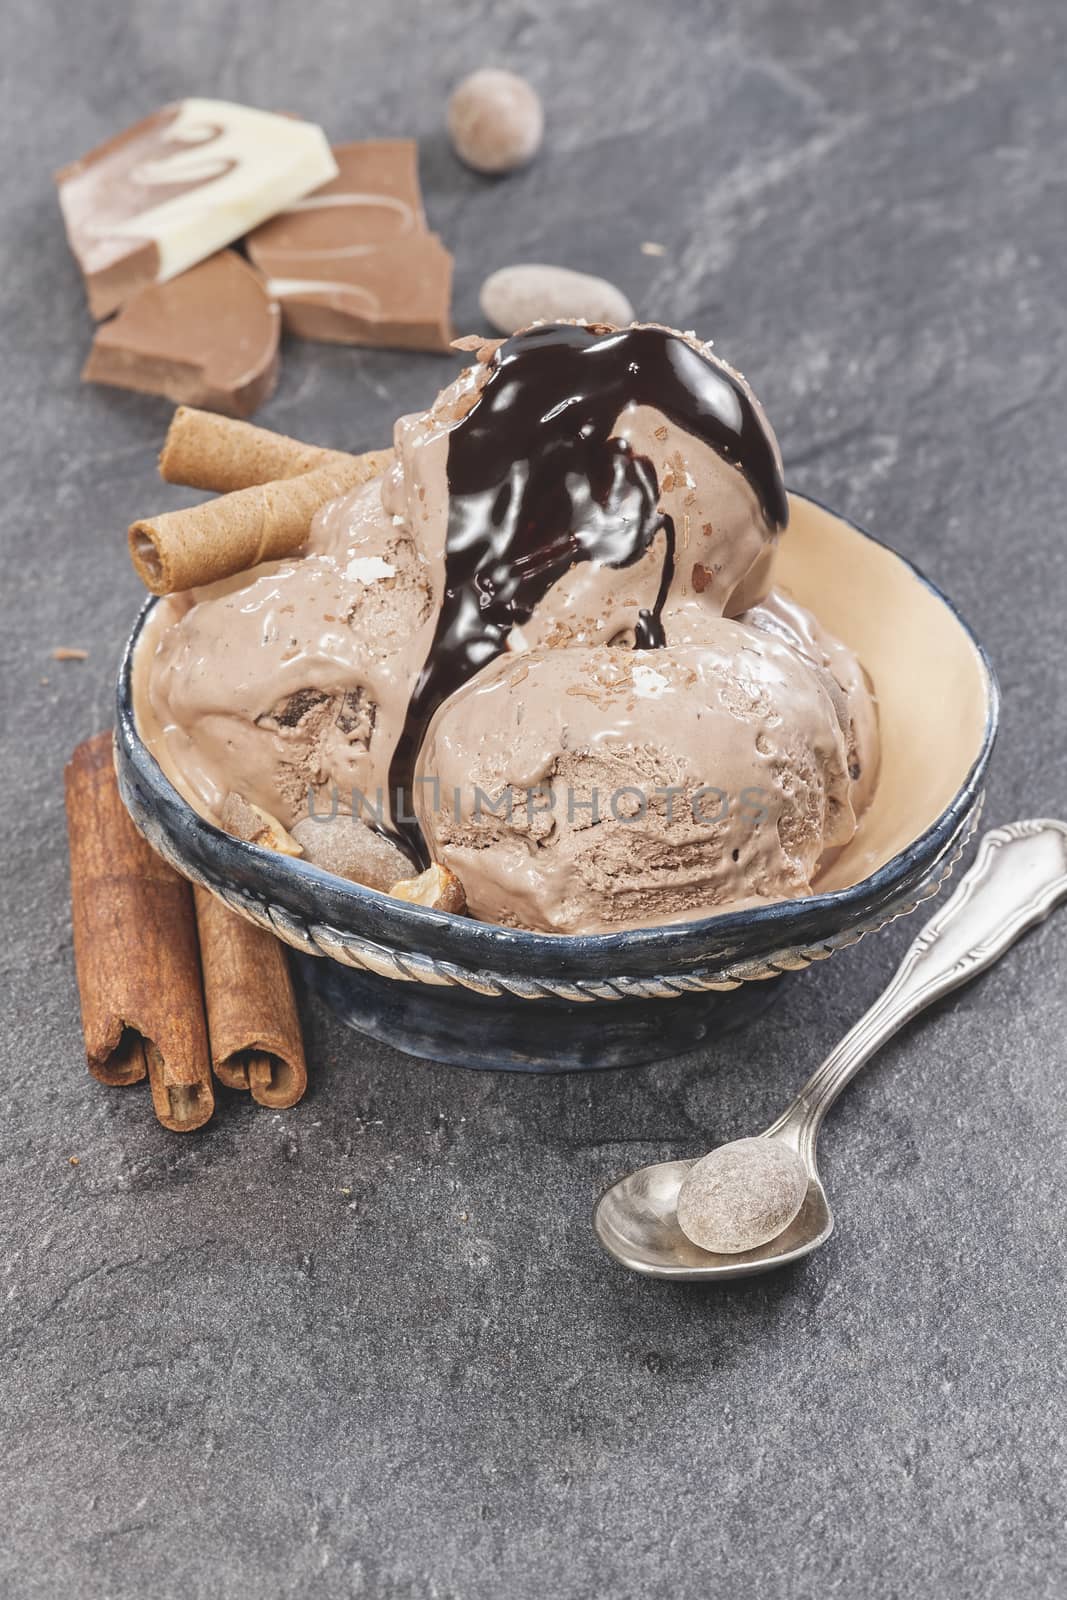 Ice cream with nuts and chocolate topping by Slast20